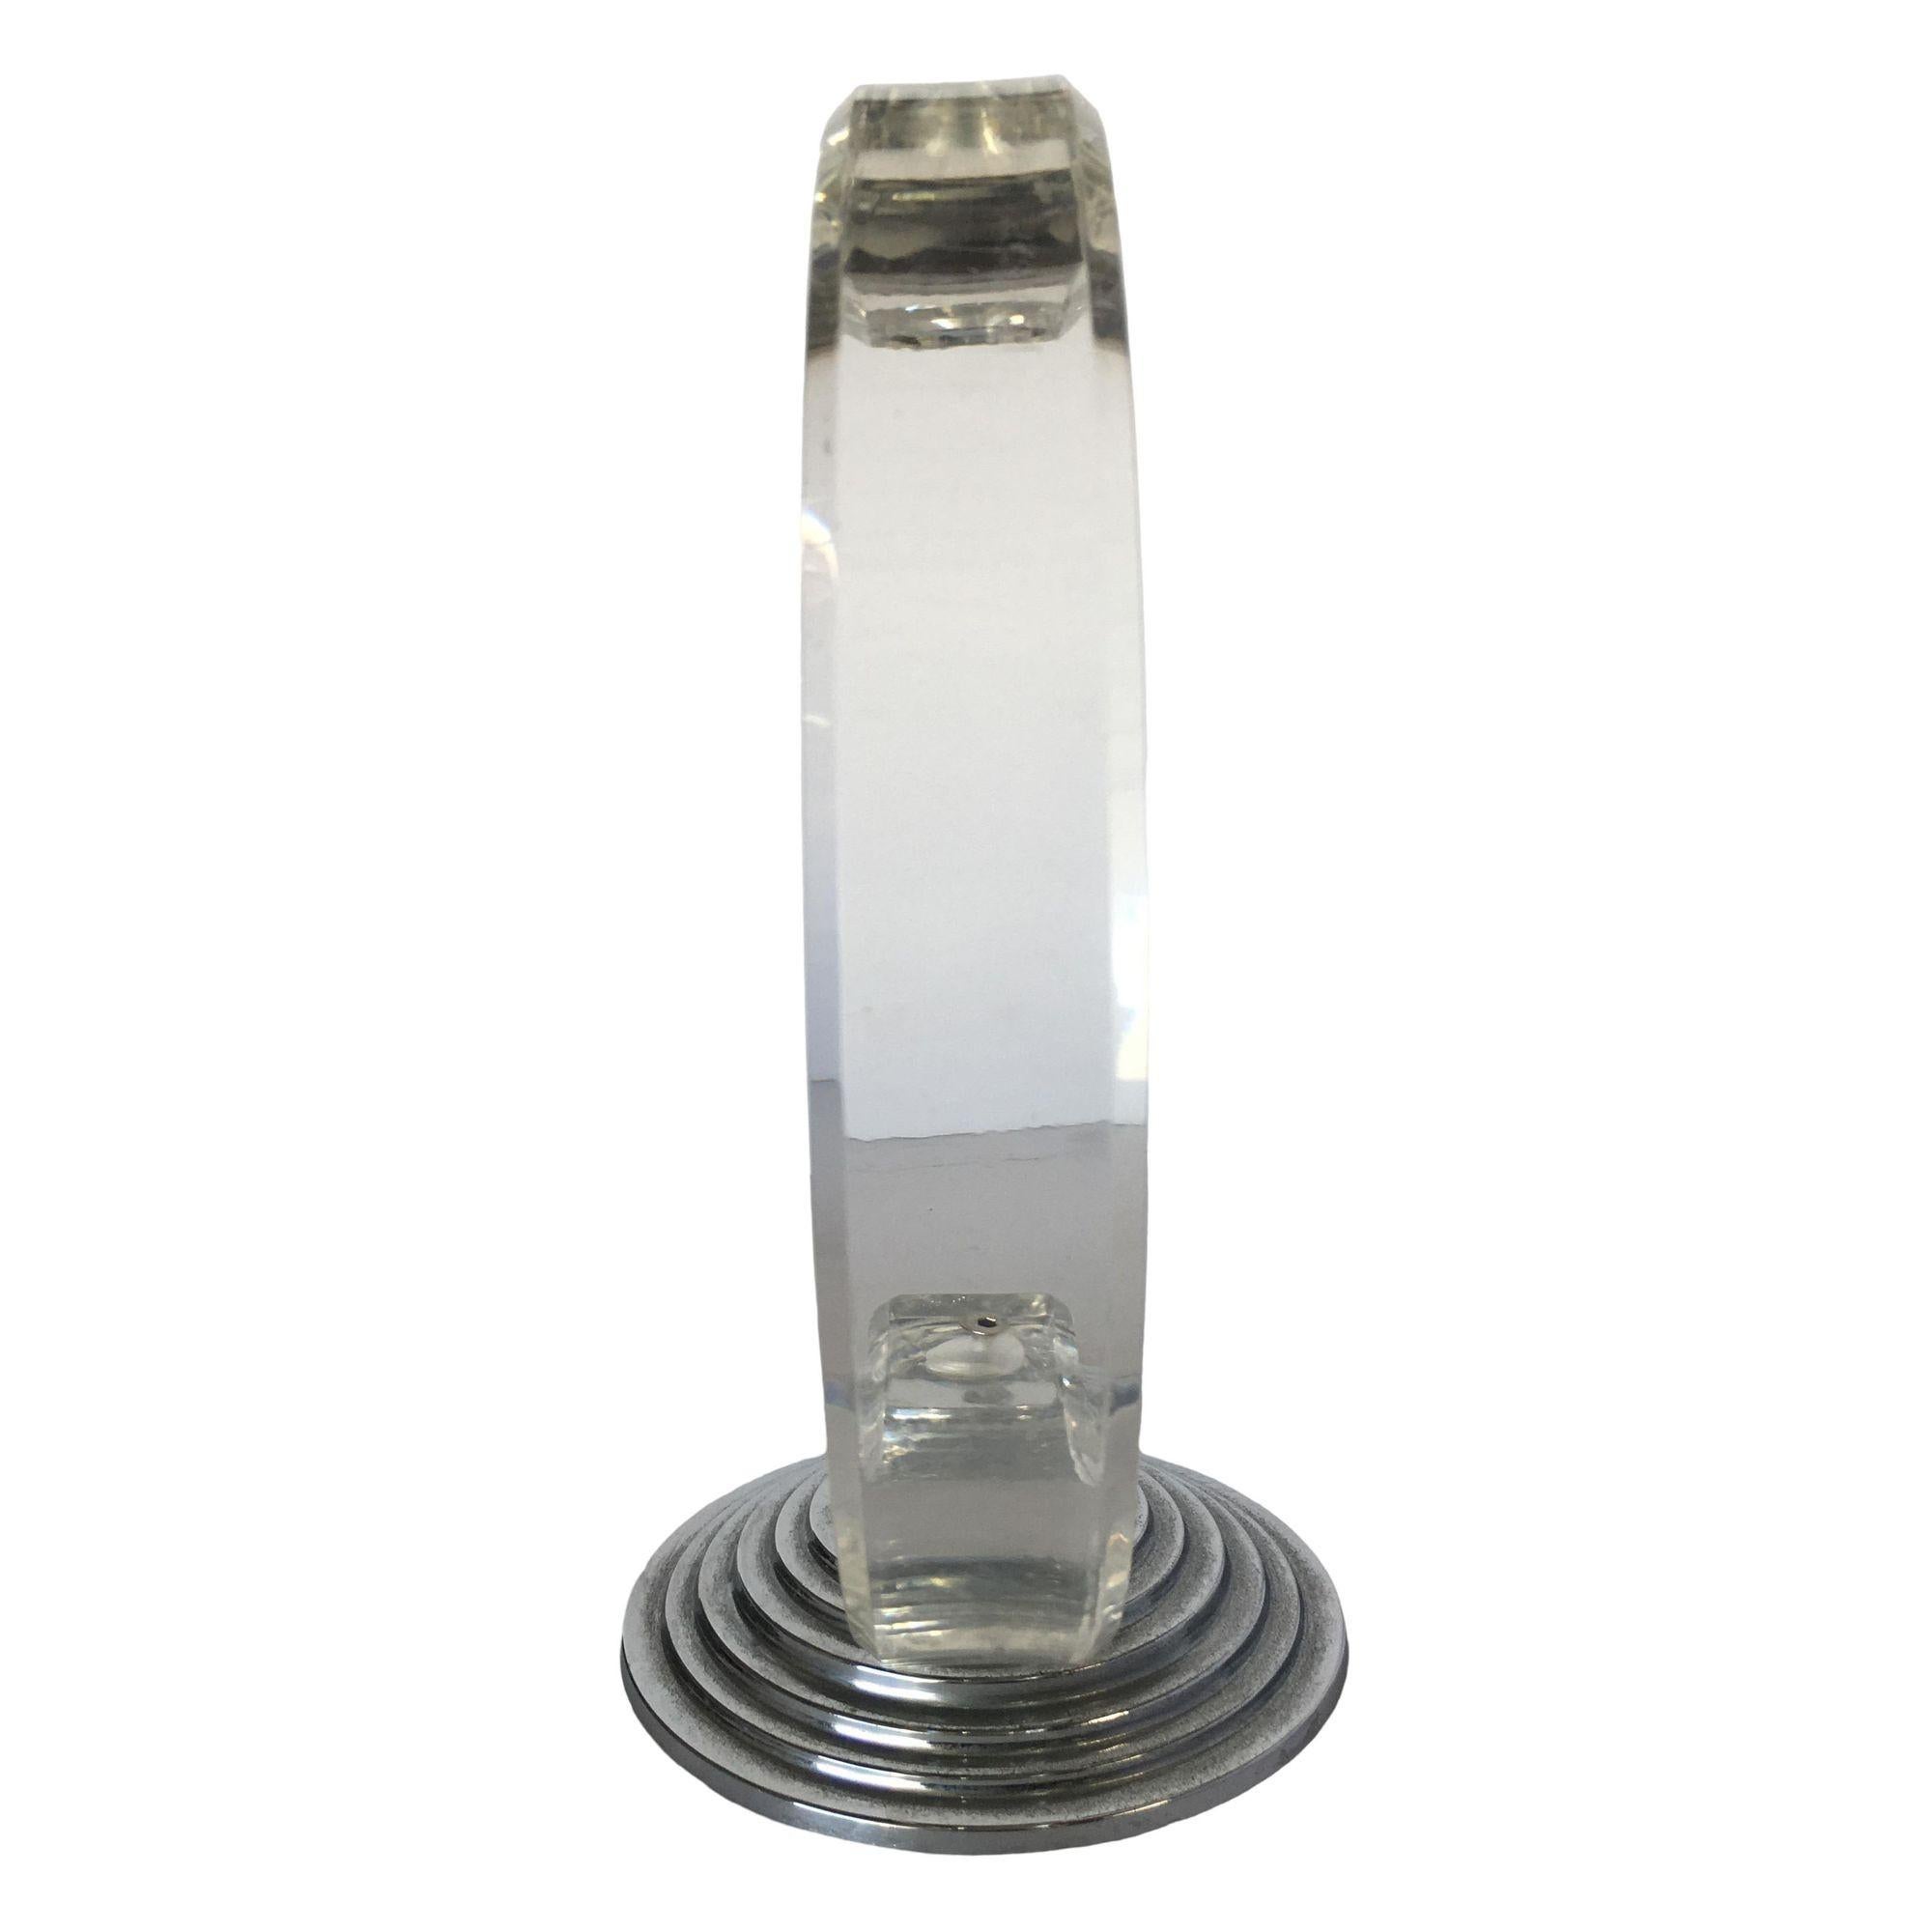 Art Deco inspired candlestick holder with a shaped piece of Lucite fixed to stepped Art Deco base.